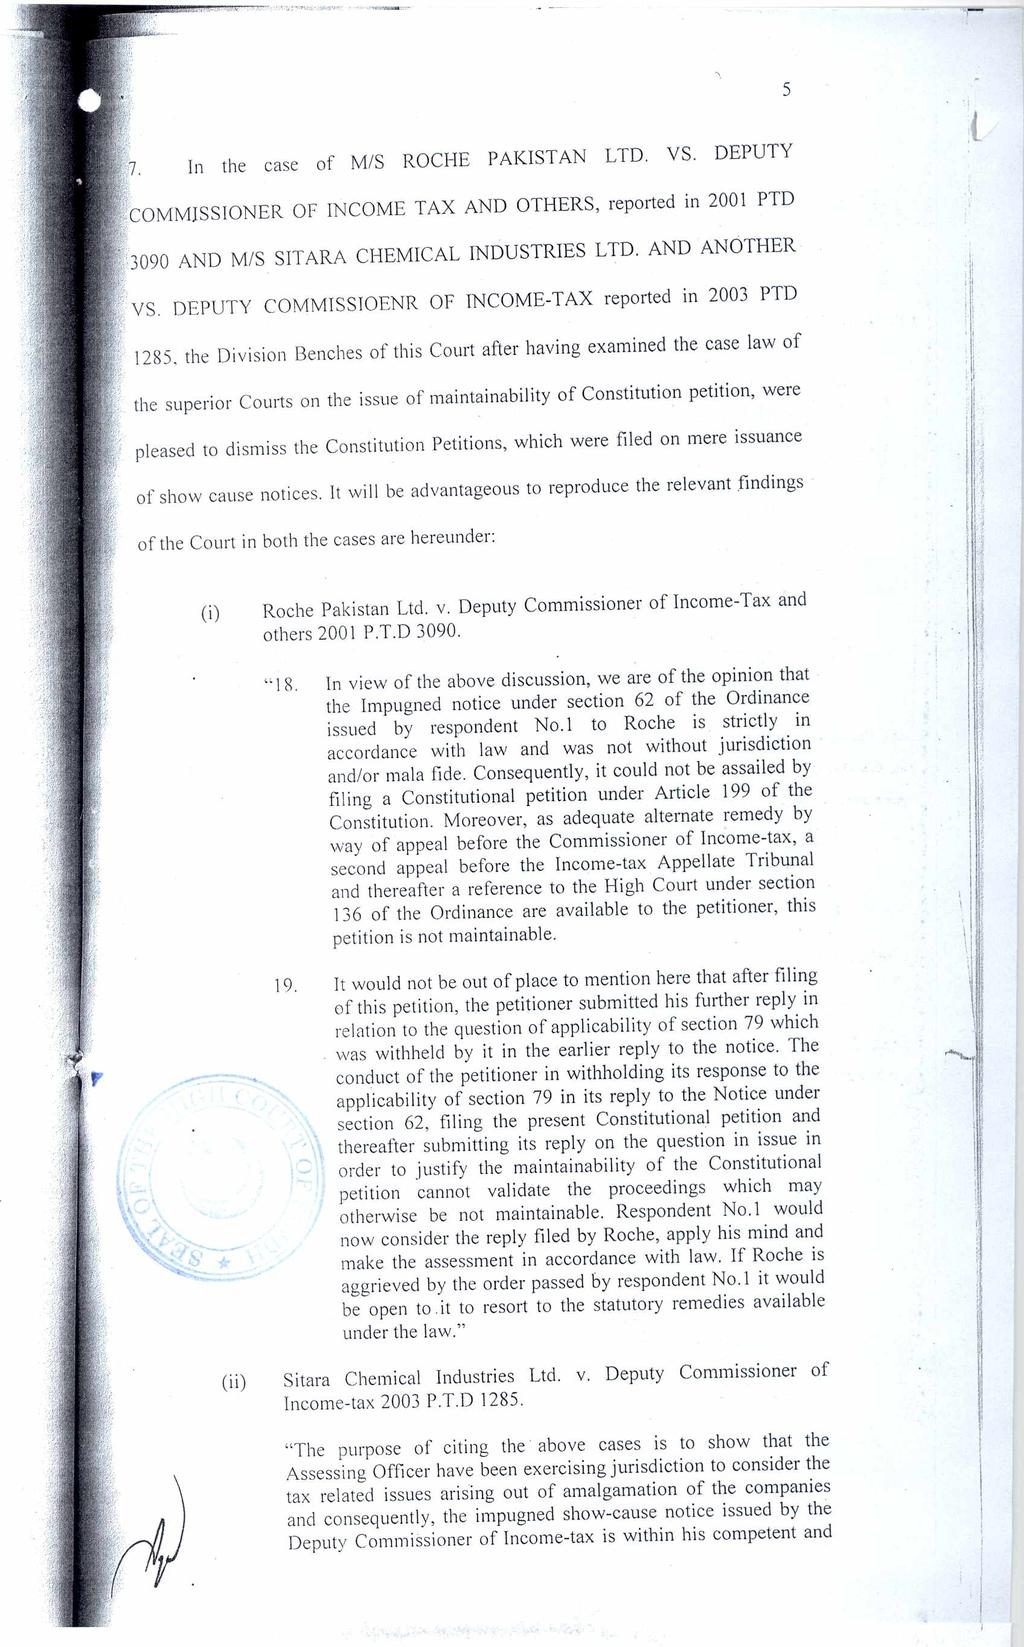 5 In the case of M/S ROCHE PAKISTAN LTD. VS. DEPUTY COMMISSIONER OF INCOME TAX AND OTHERS, reported in 2001 PTD 3090 AND M/S SITARA CHEMICAL INDUSTRIES LTD. AND ANOTHER VS.